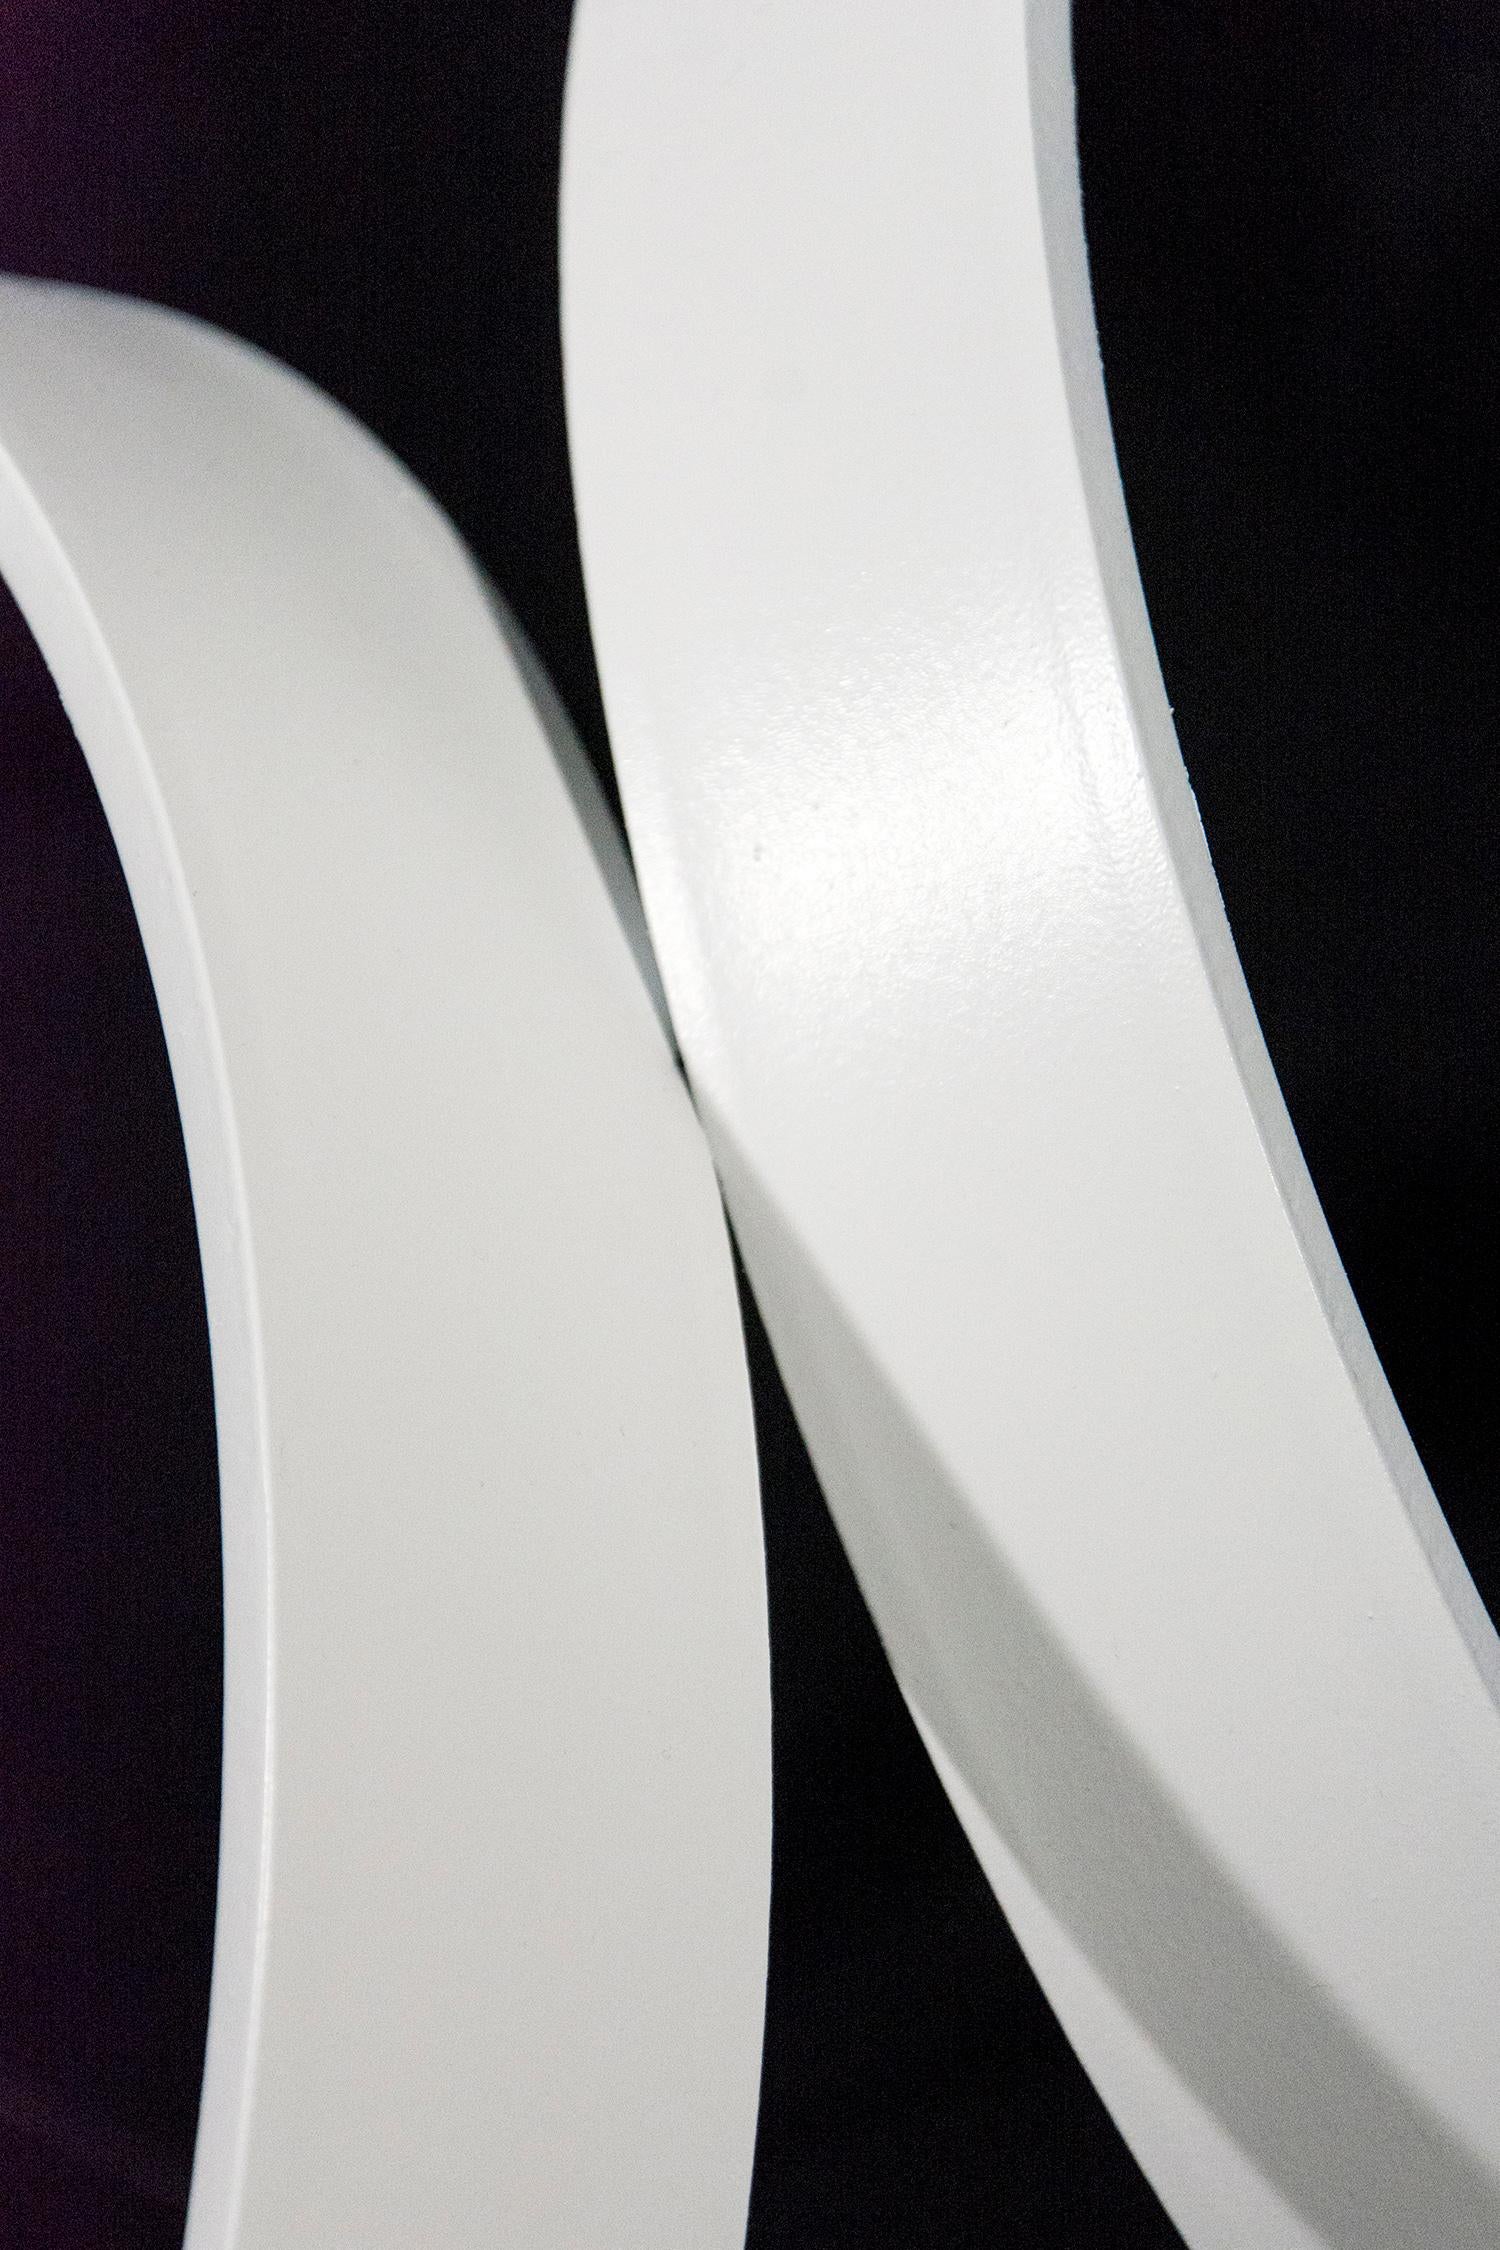 Temps Zero White 3/10 - contemporary, abstract, stainless steel sculpture For Sale 6